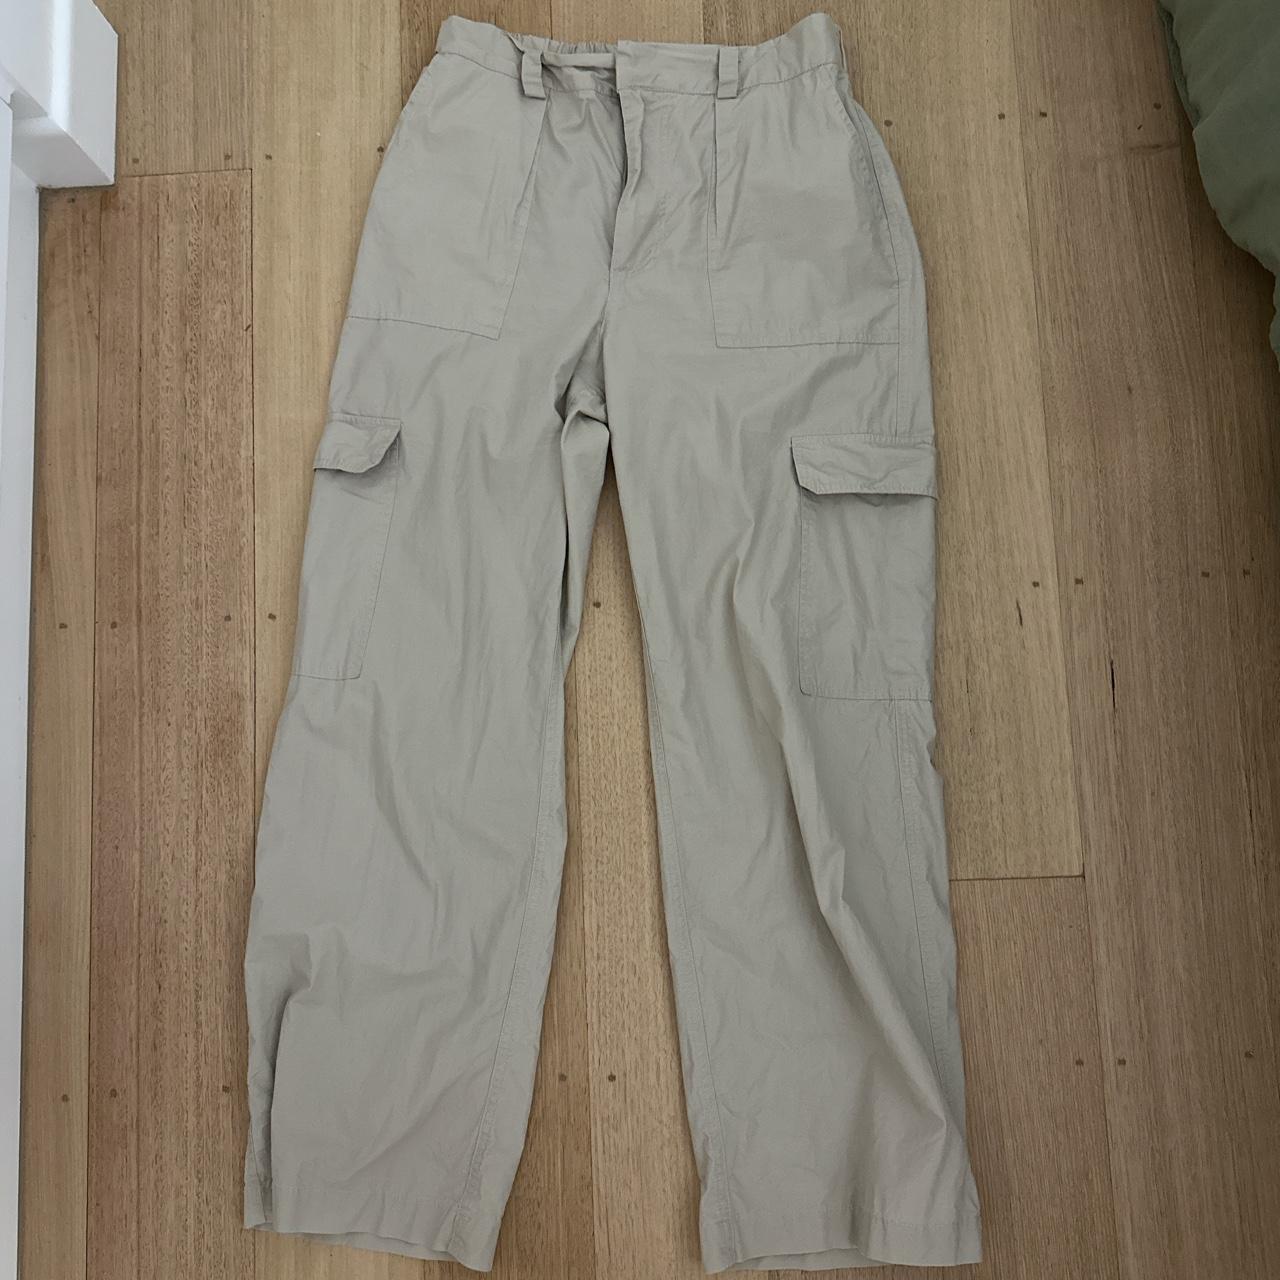 size 10 cargo pants from cotton on - Depop